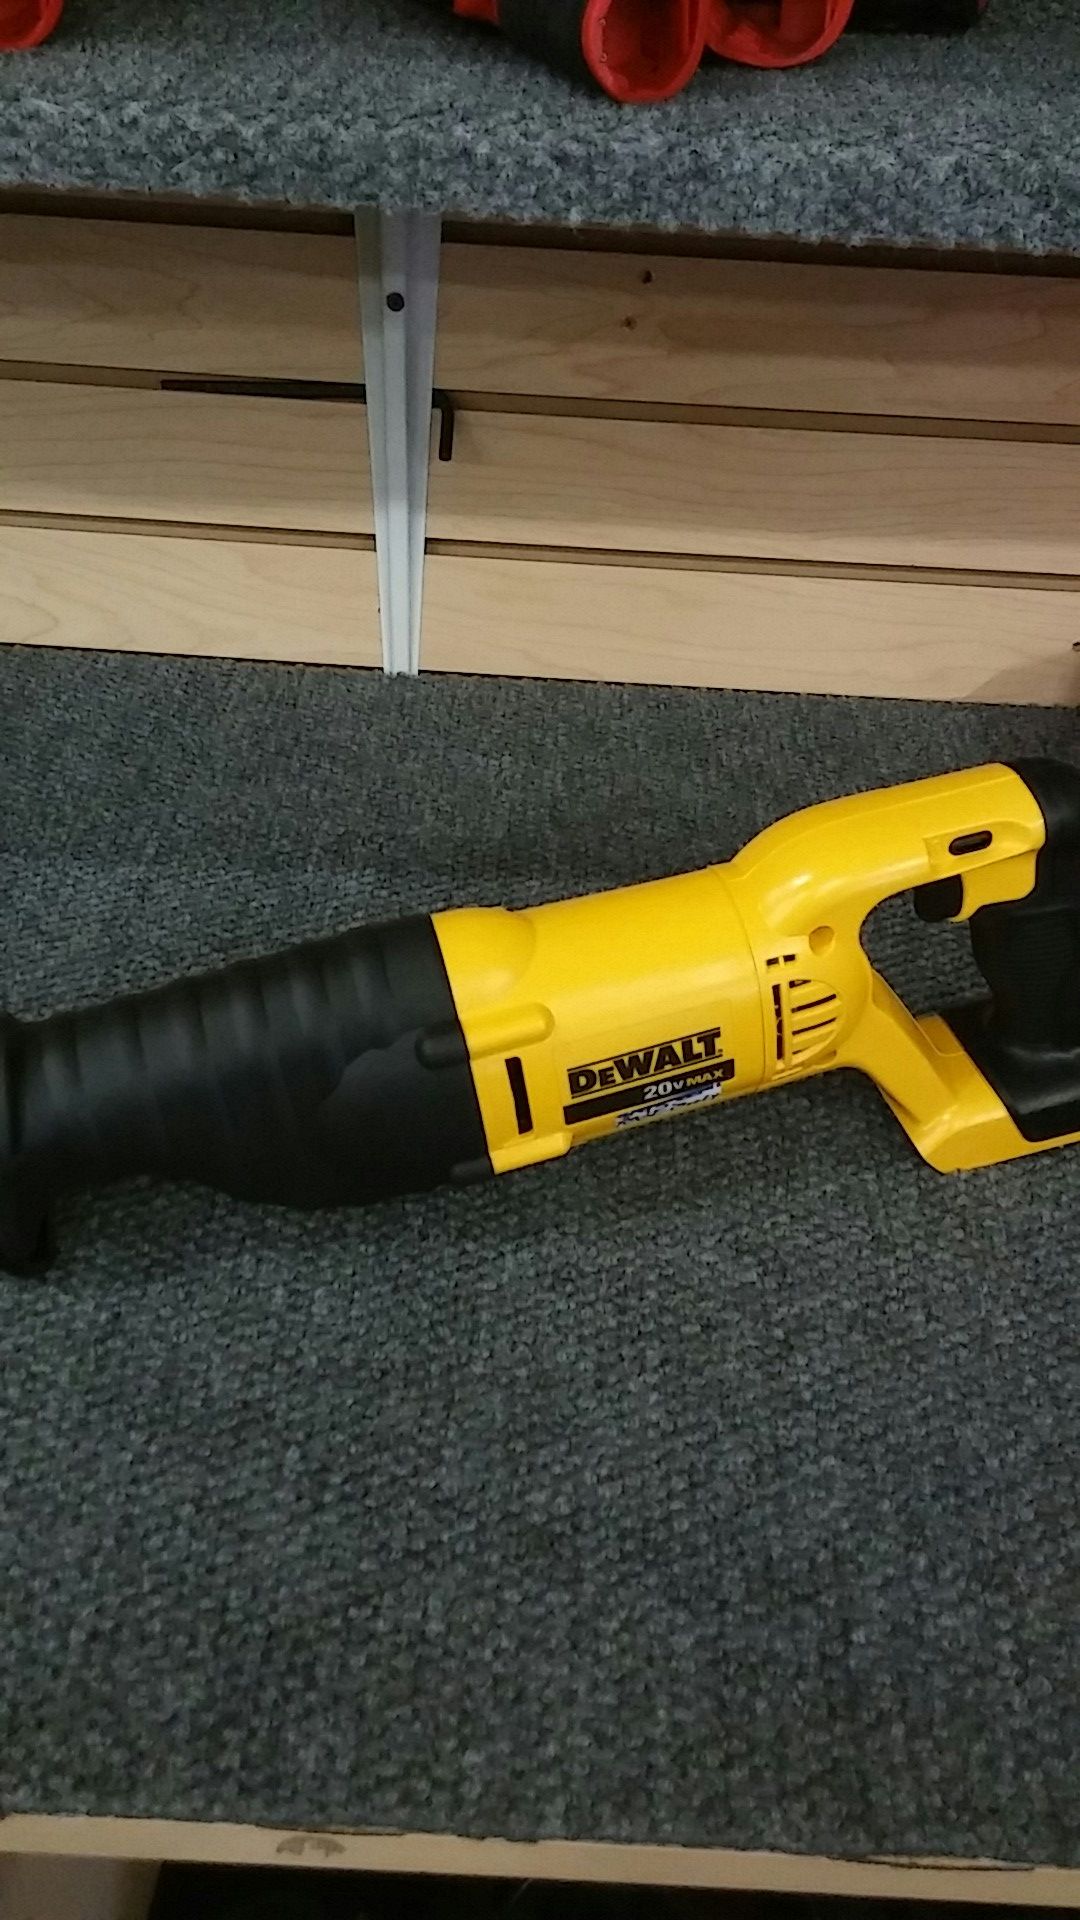 DEWALT 20V. MAX VARIABLE SPEED RECIPROCATING SAW (TOOL ONLY)